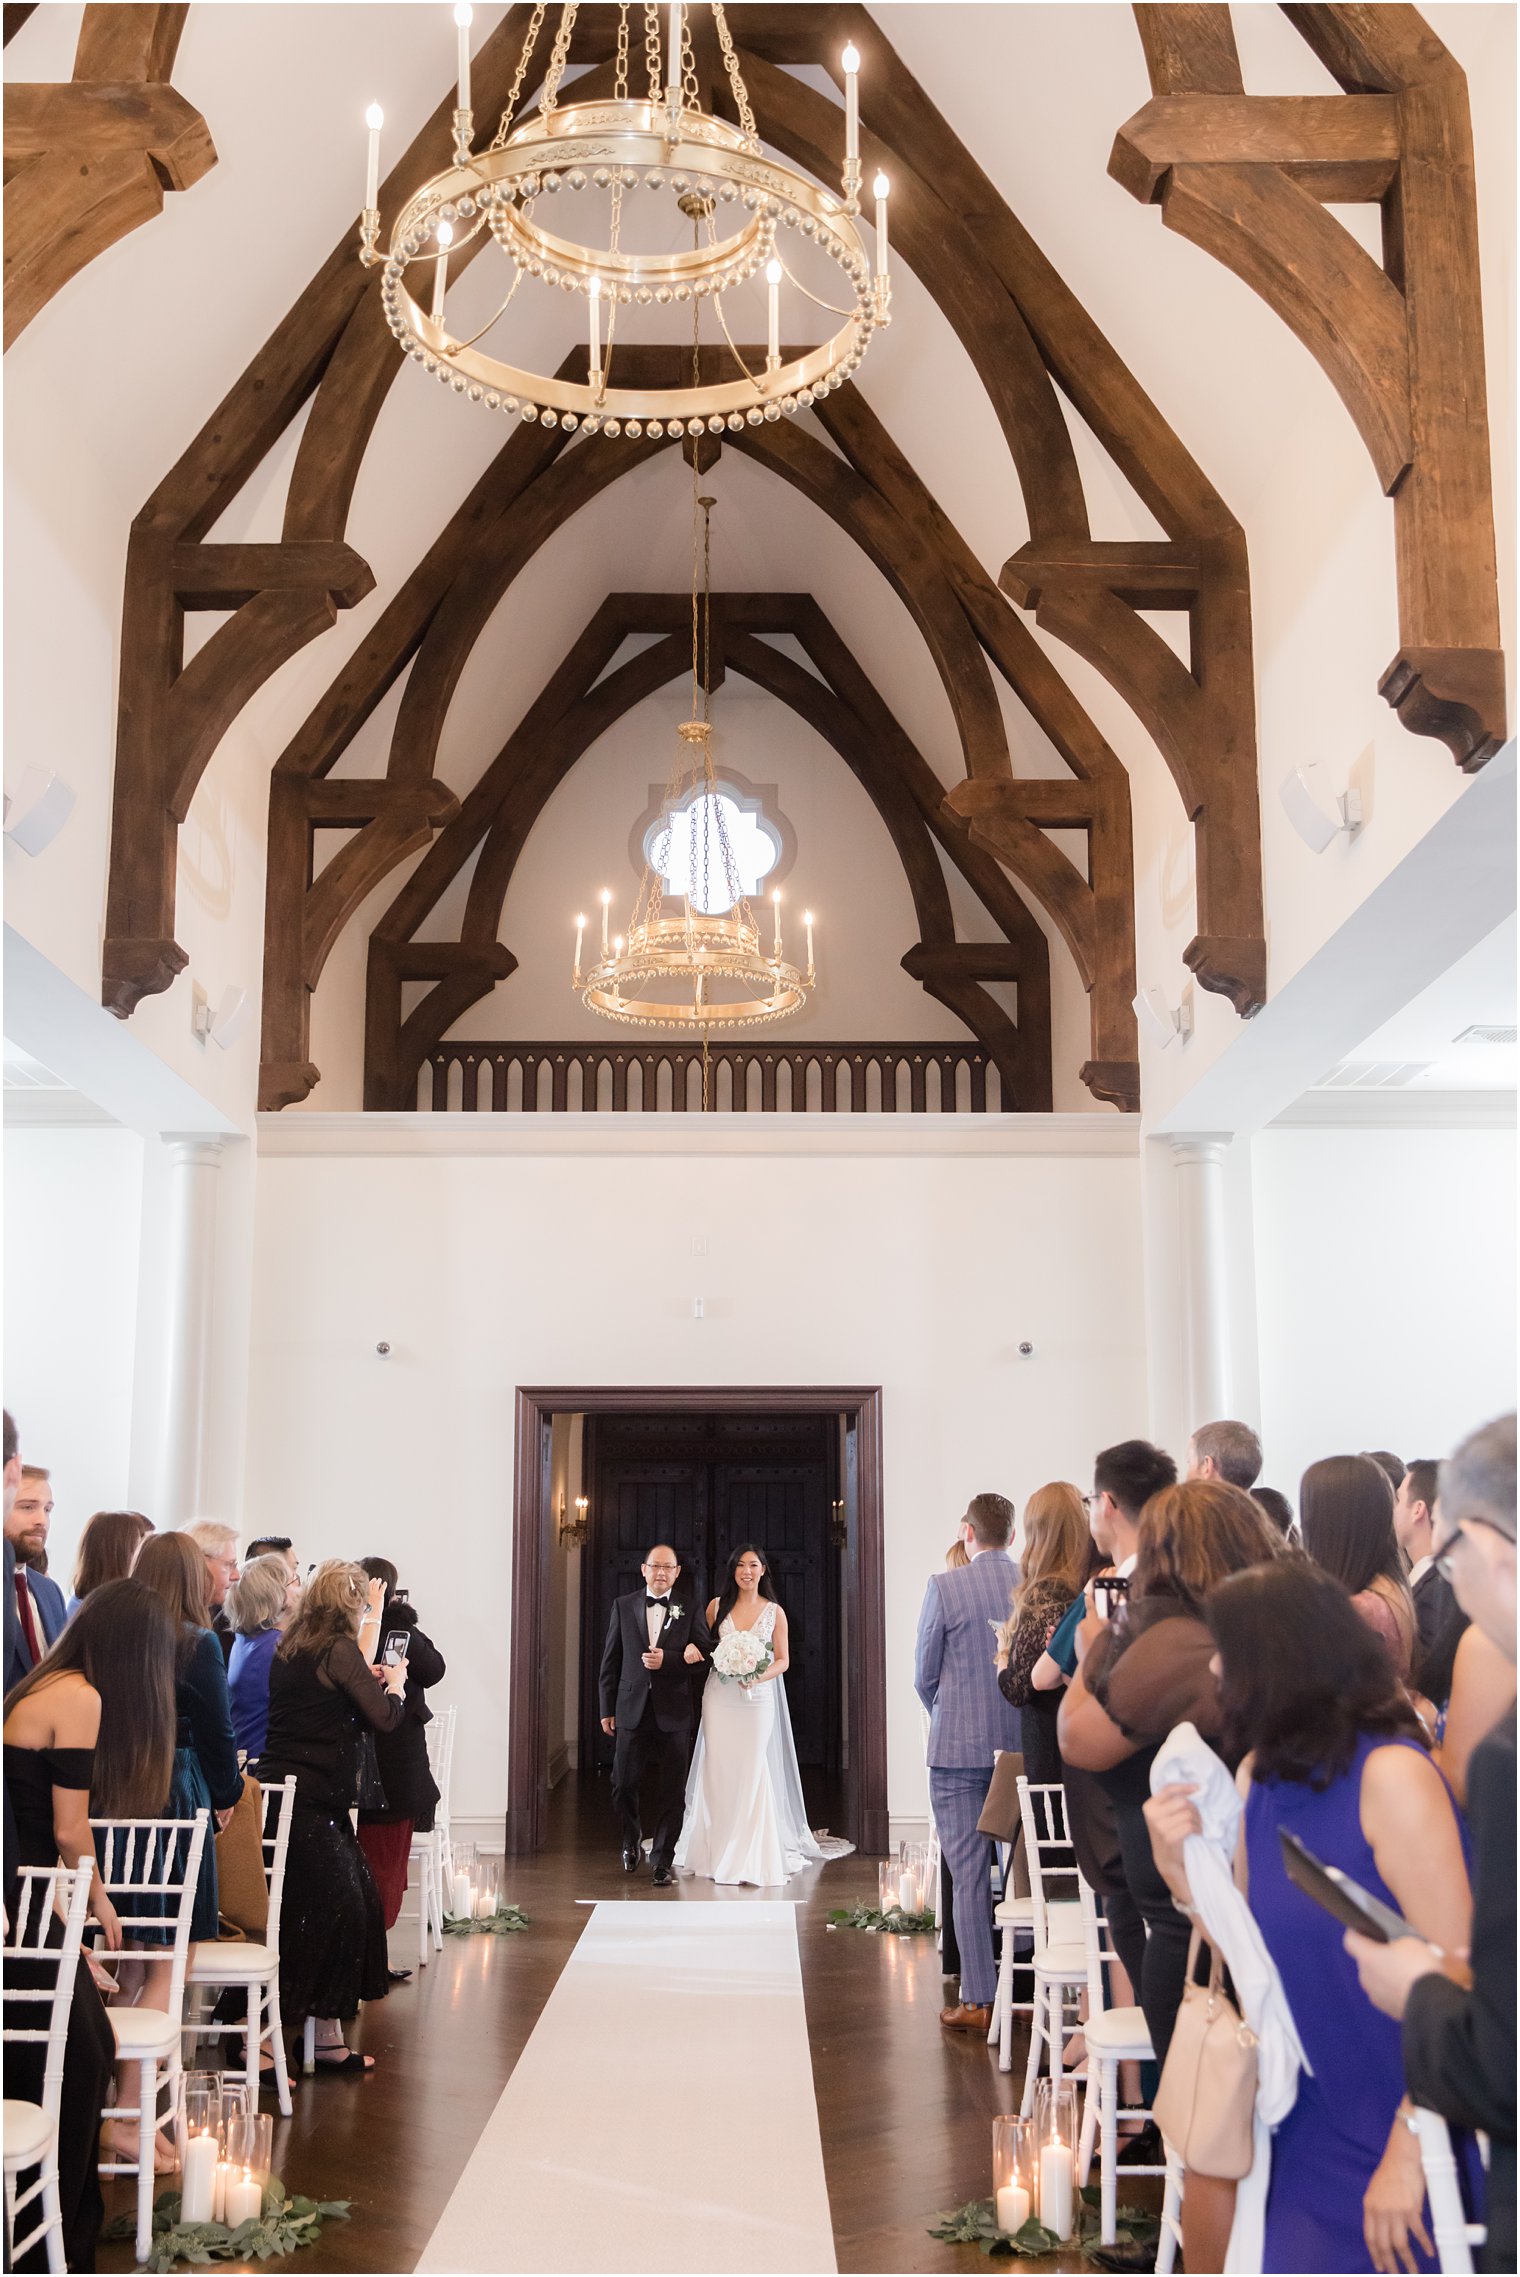 Wedding ceremony in Park Chateau Estate chapel